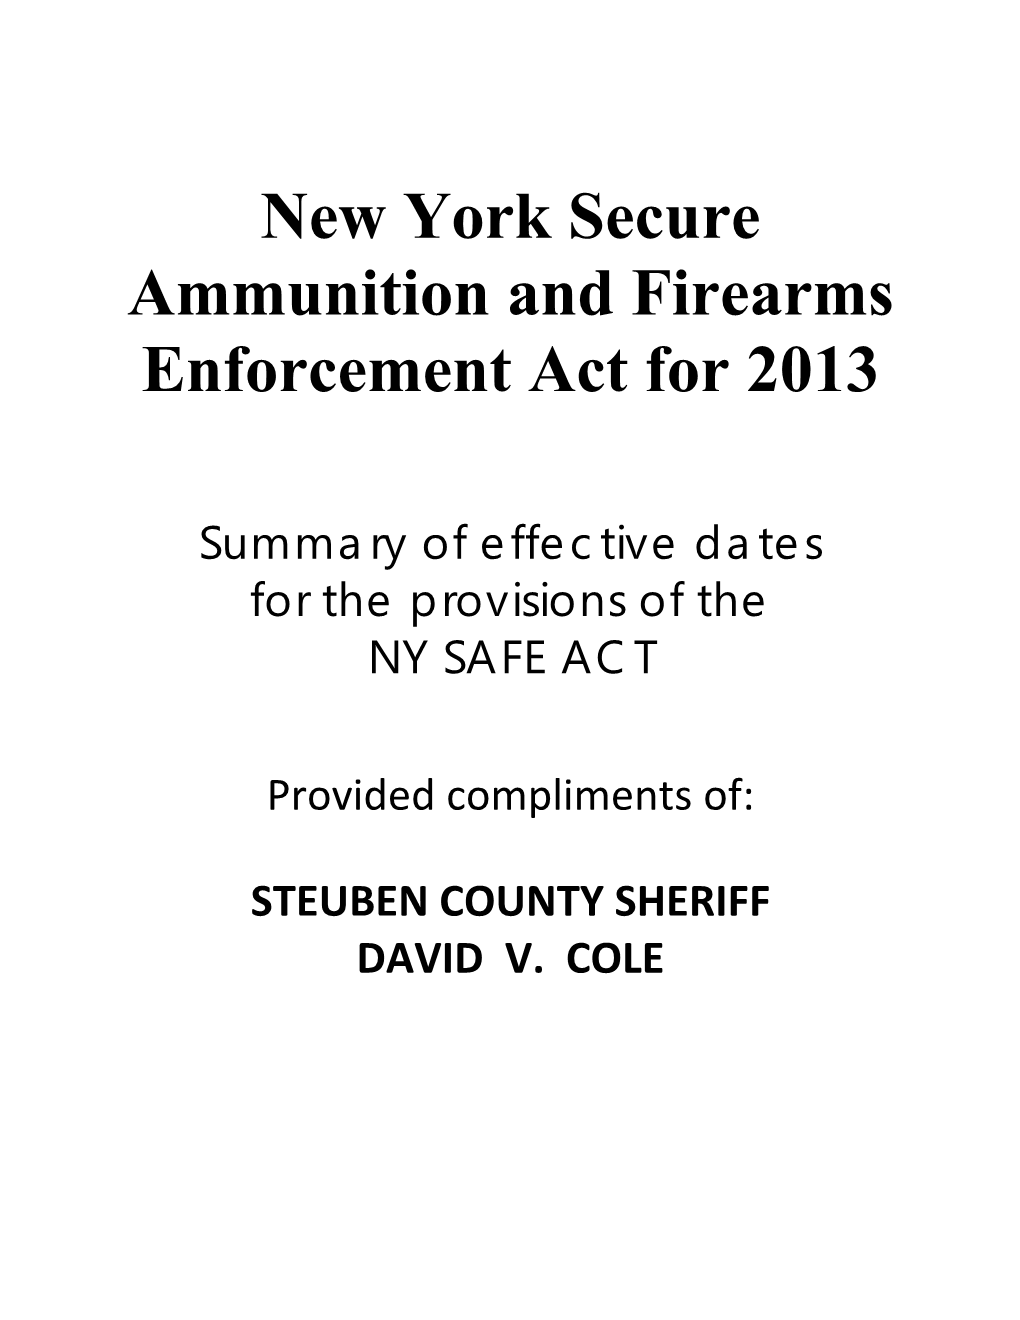 New York Secure Ammunition and Firearms Enforcement Act for 2013